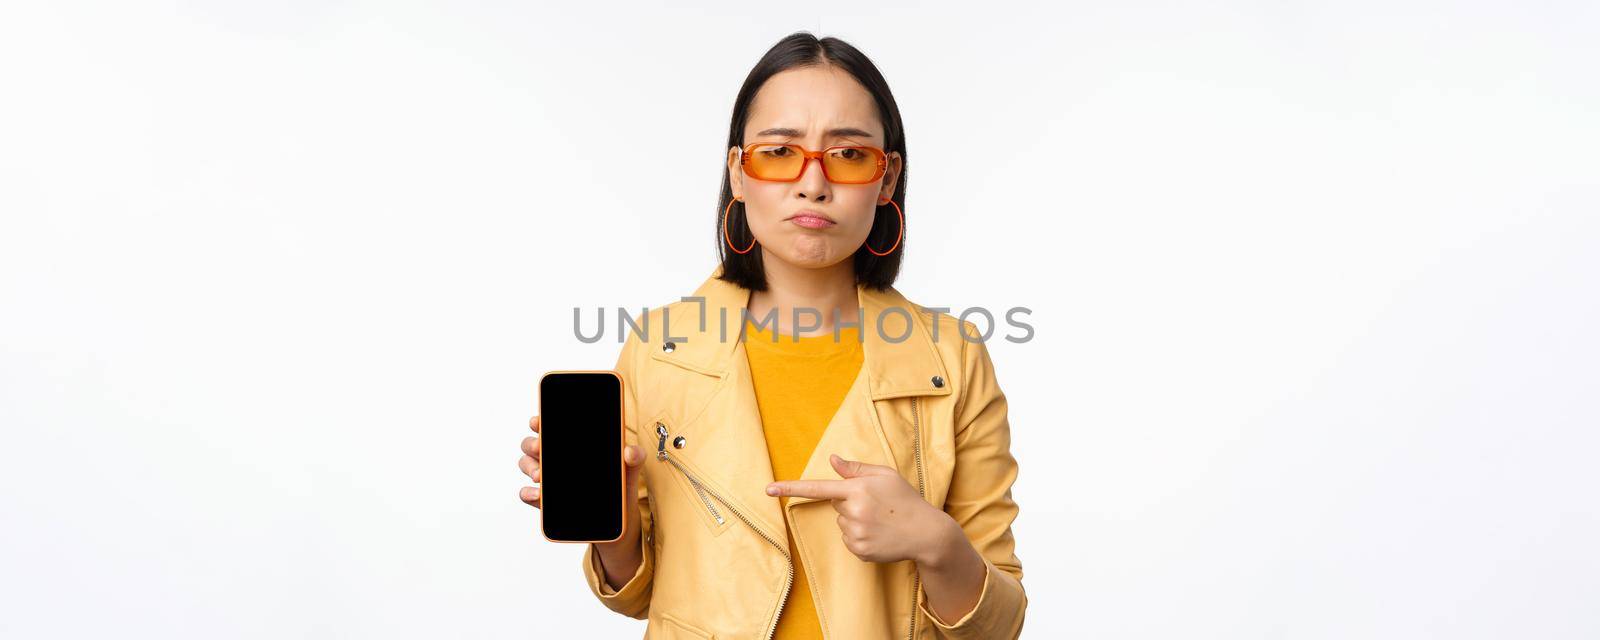 Portrait of sad asian woman in sunglasses, pointing finger at mobile phone app interface, showing smartphone application, standing over white background.